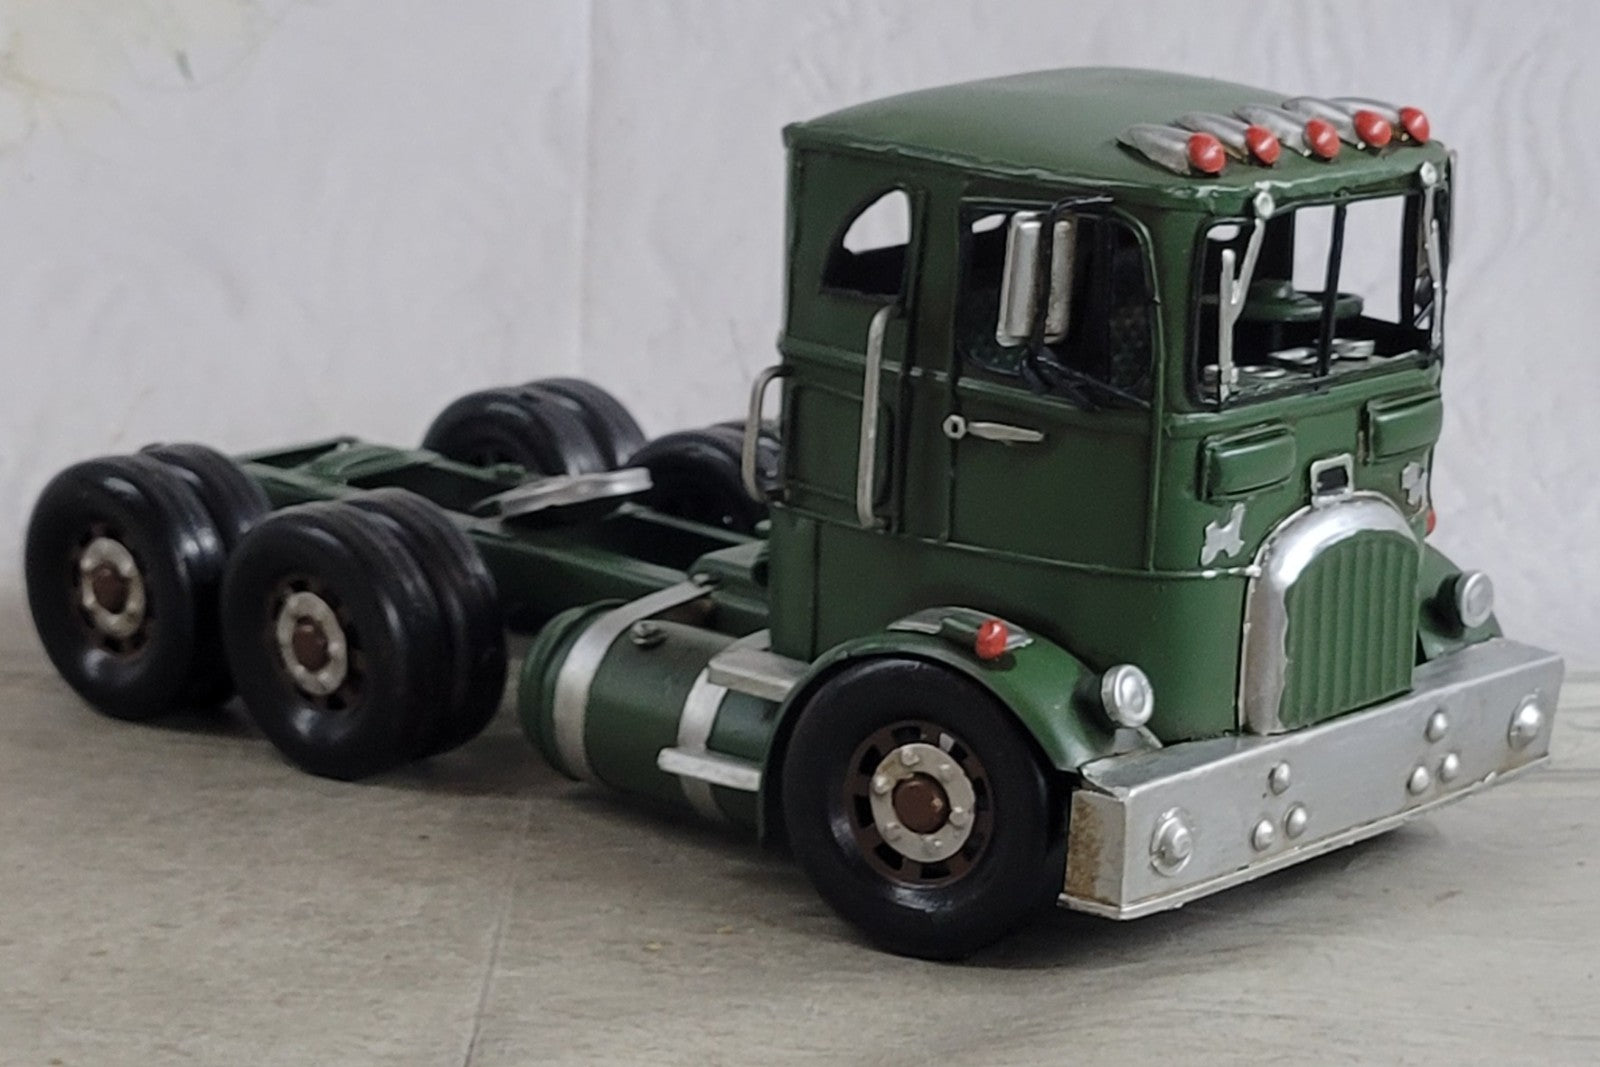 Vintage Home Decor Retro Truck Iron Toy Antique Truck Models For Decoration Gift